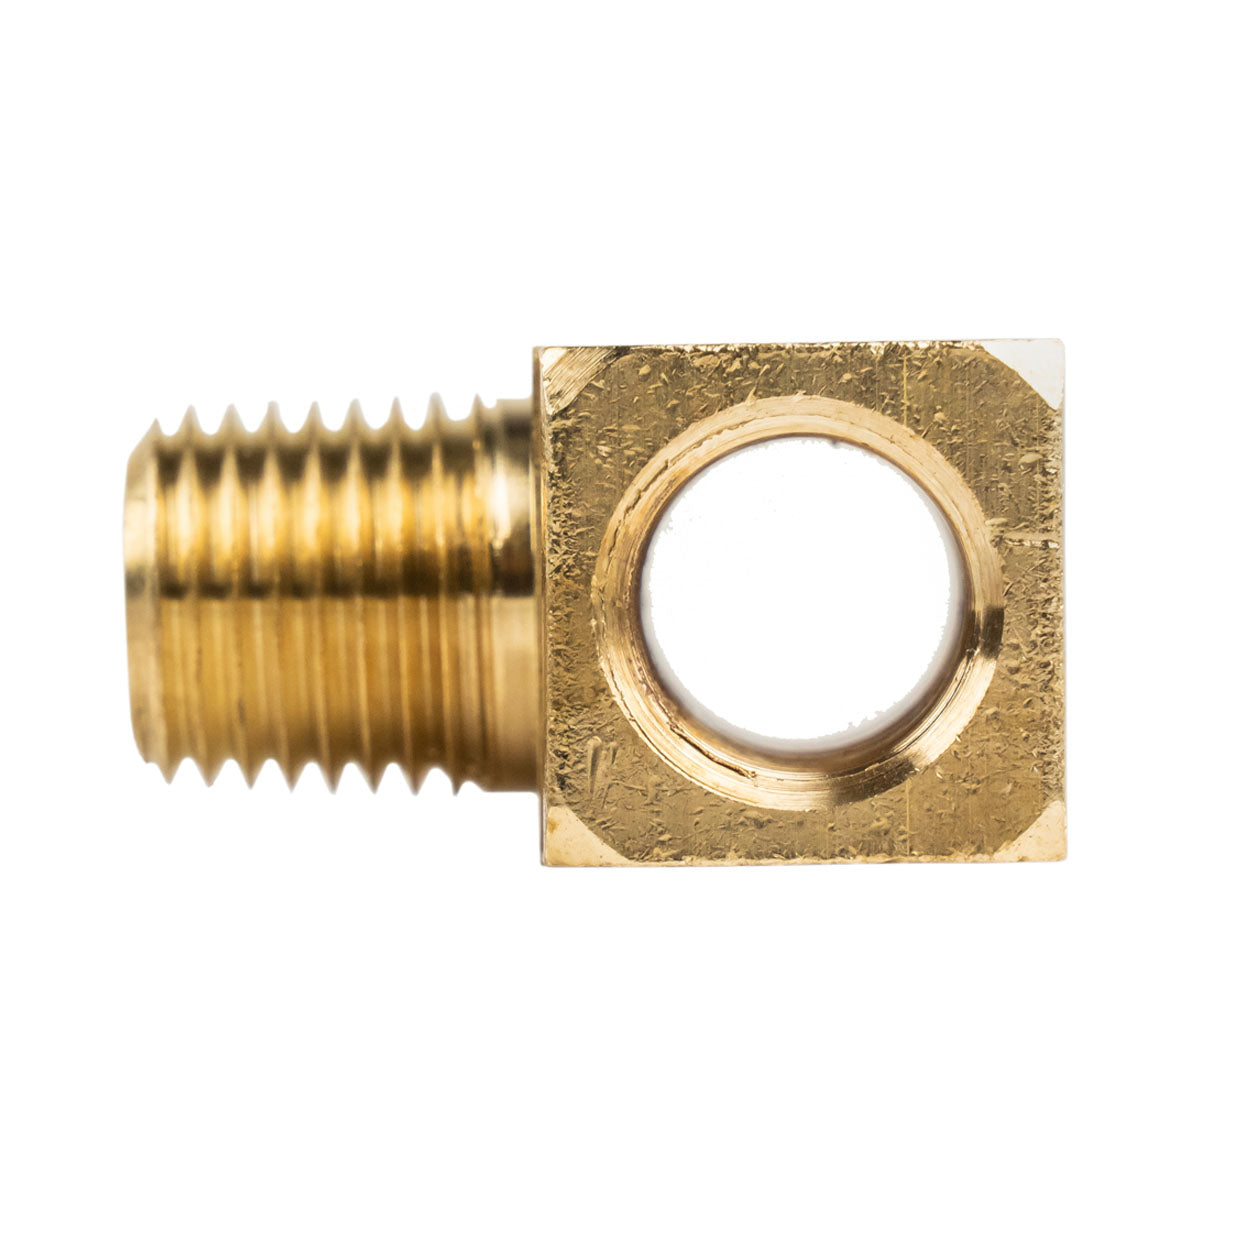 Male Branch Tee 1/4" Male NPT x 1/4" Female NPT Brass Union Tee Pipe Connector